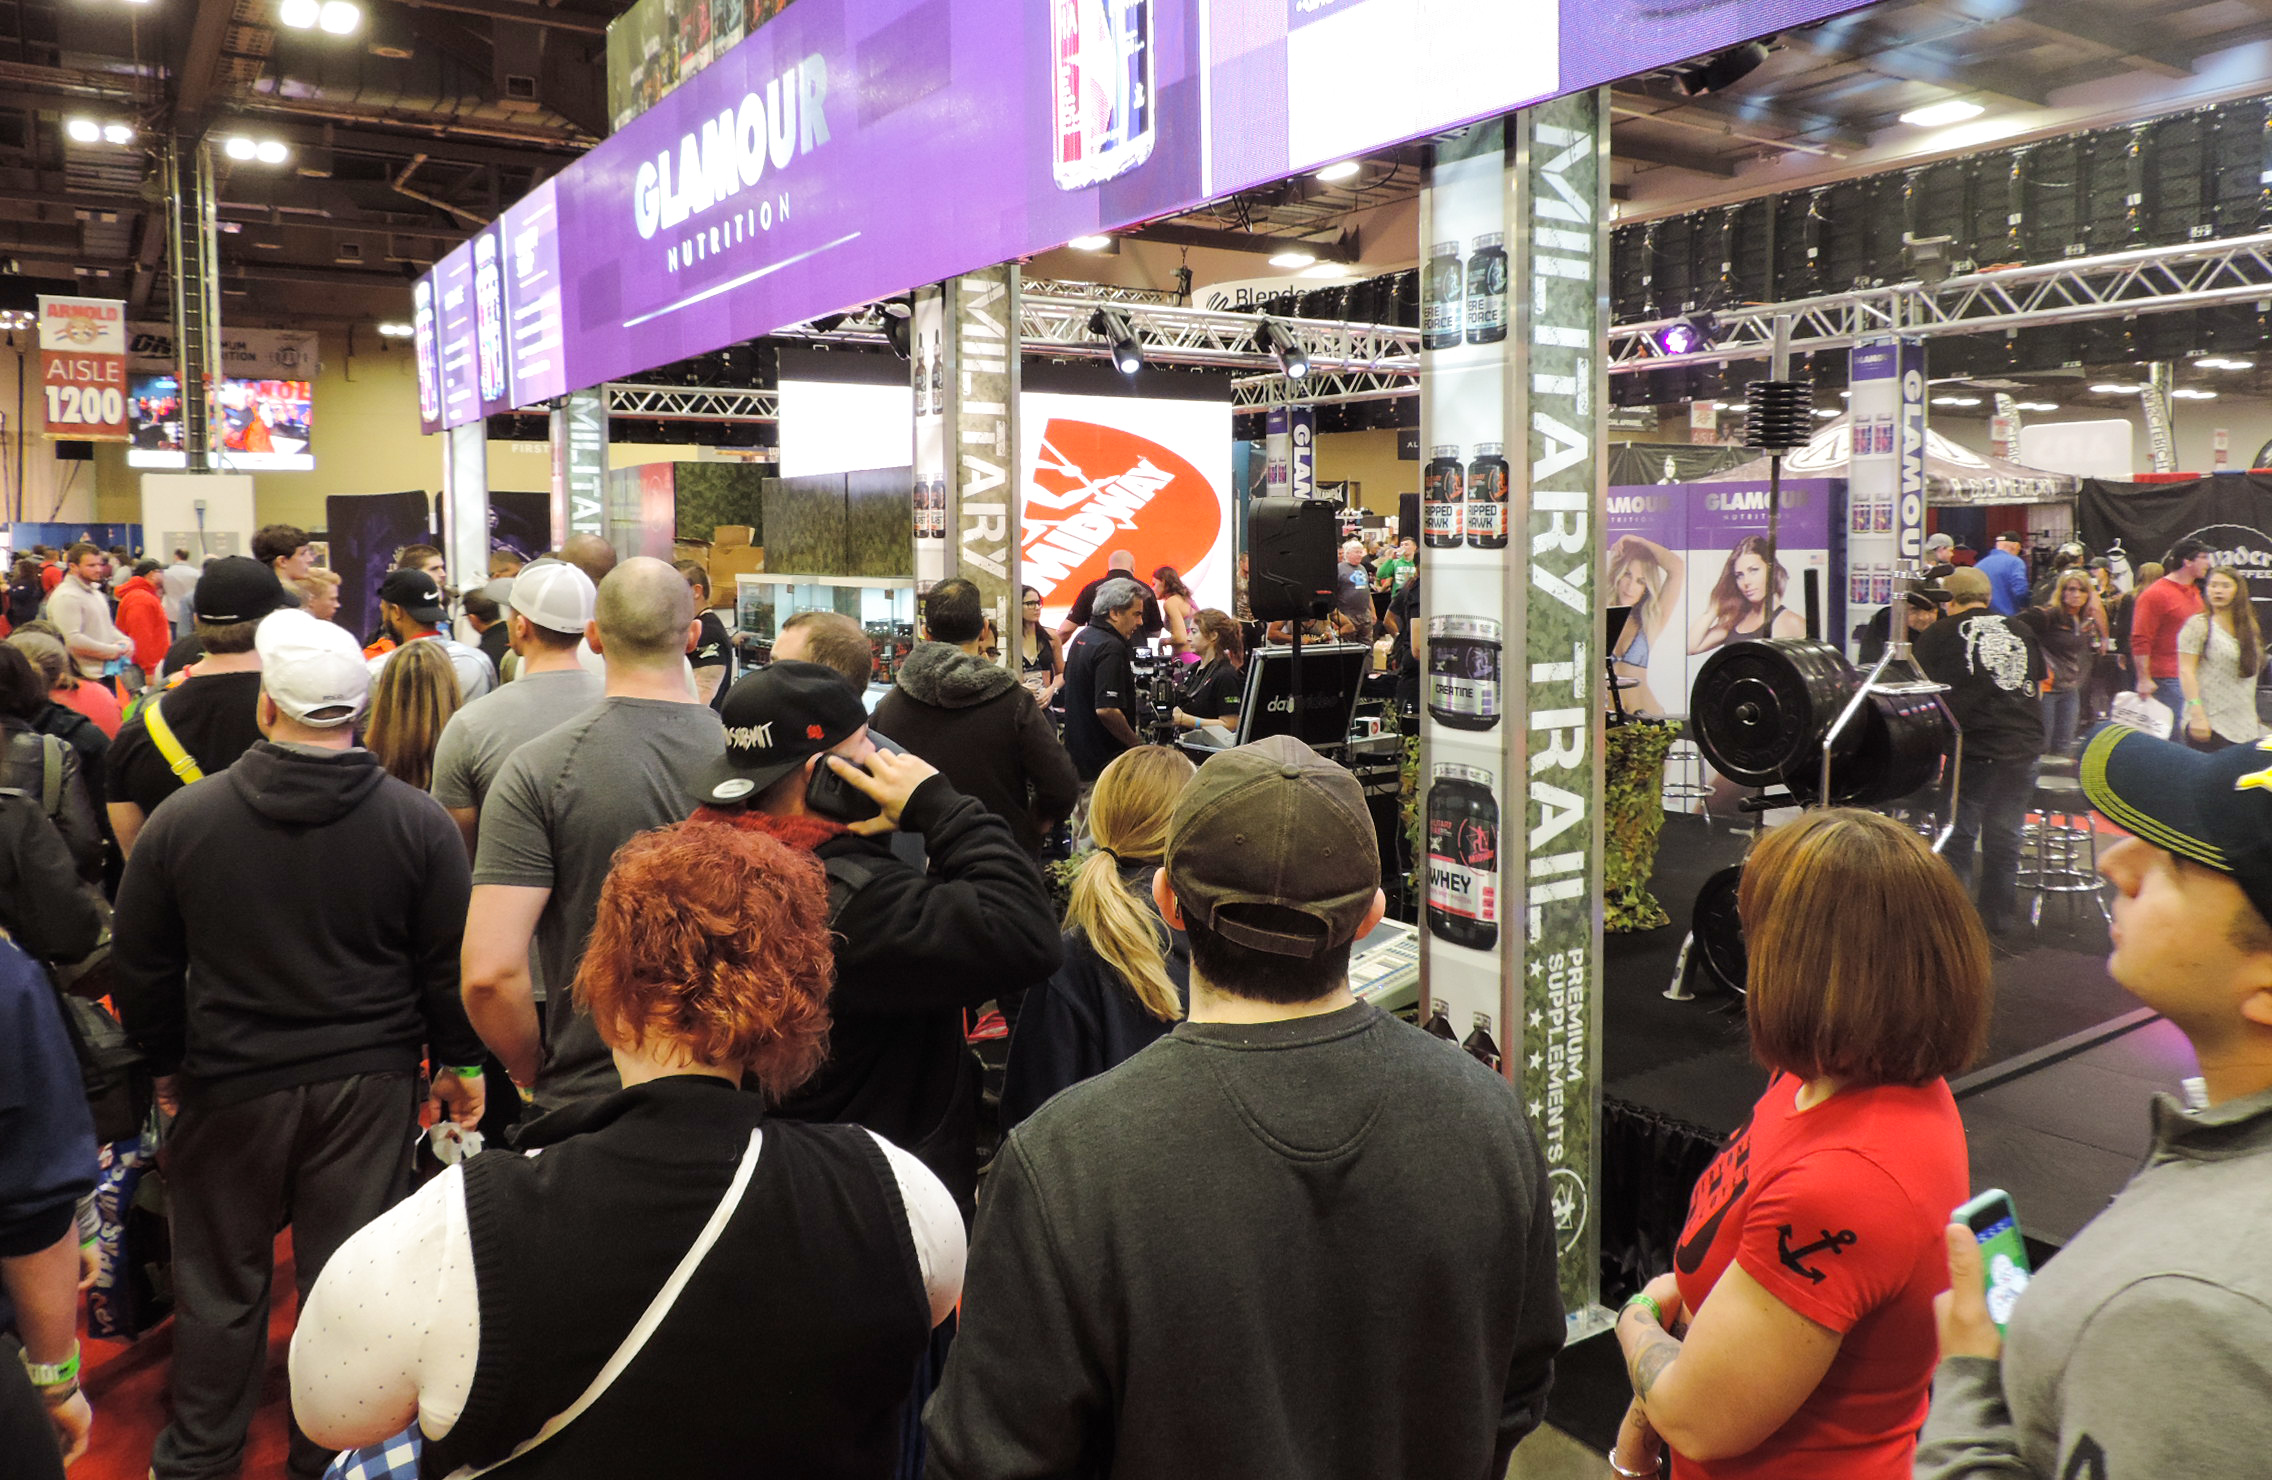 People checking out the Glamour Nutrition & Military Trail booth.